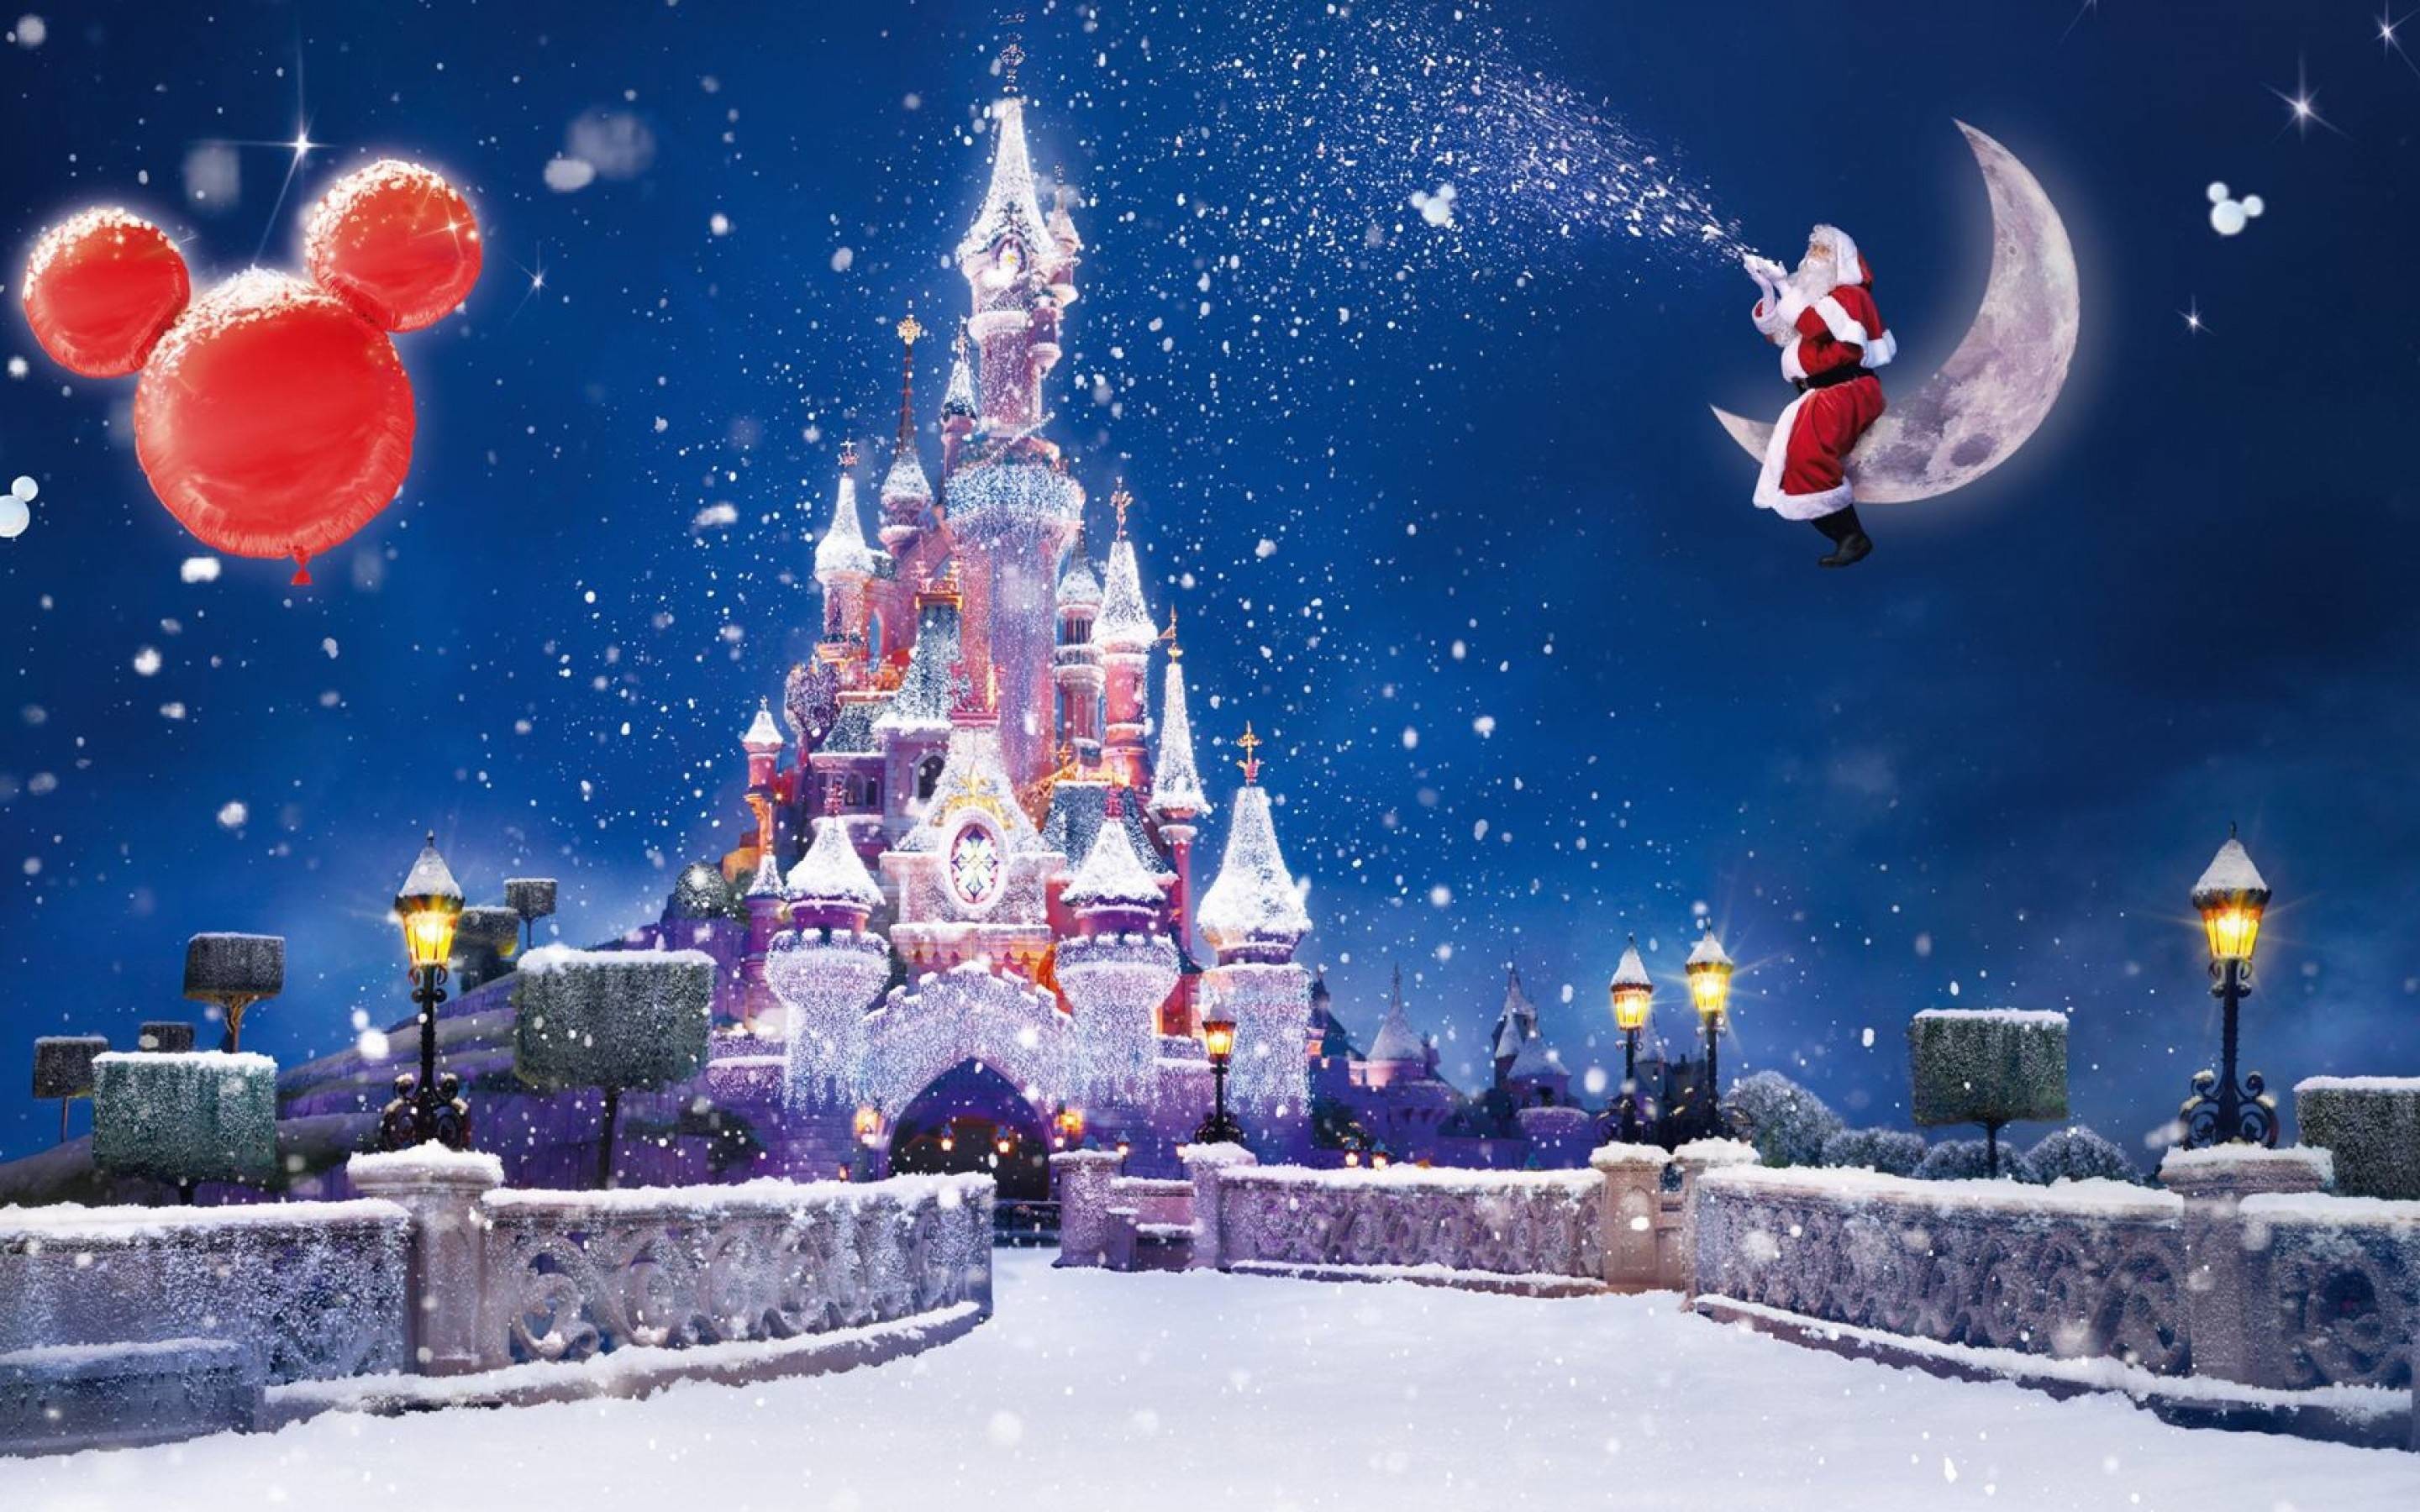 Disney Christmas Wallpapers – Full HD wallpaper search – page 2